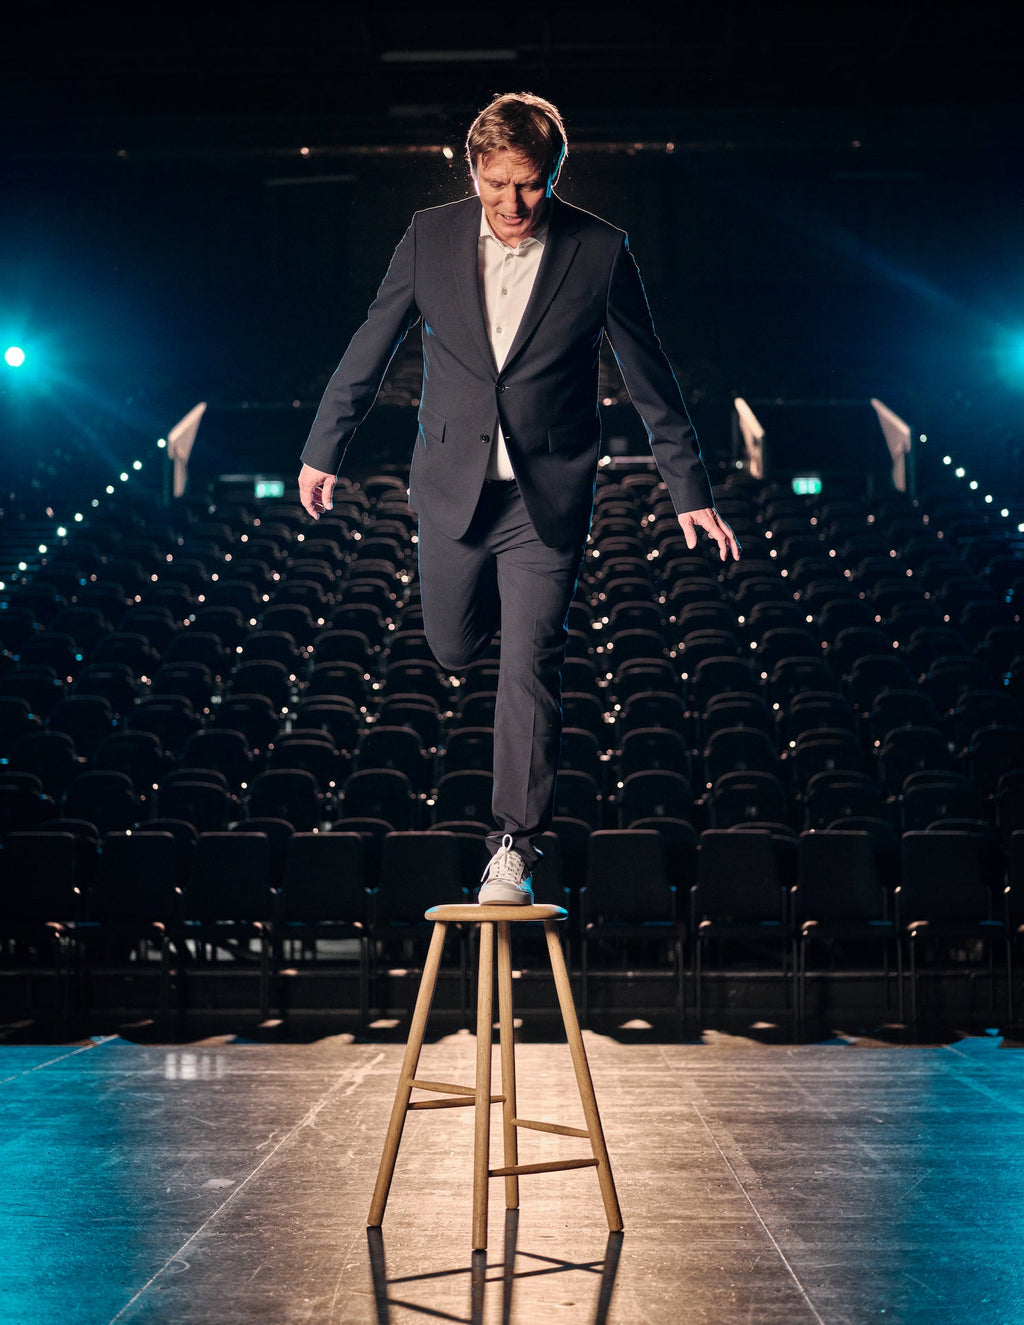 Oliver Masucci wearing a grey suit, white shirt and white sneakers balancing one foot on a chair in a theater